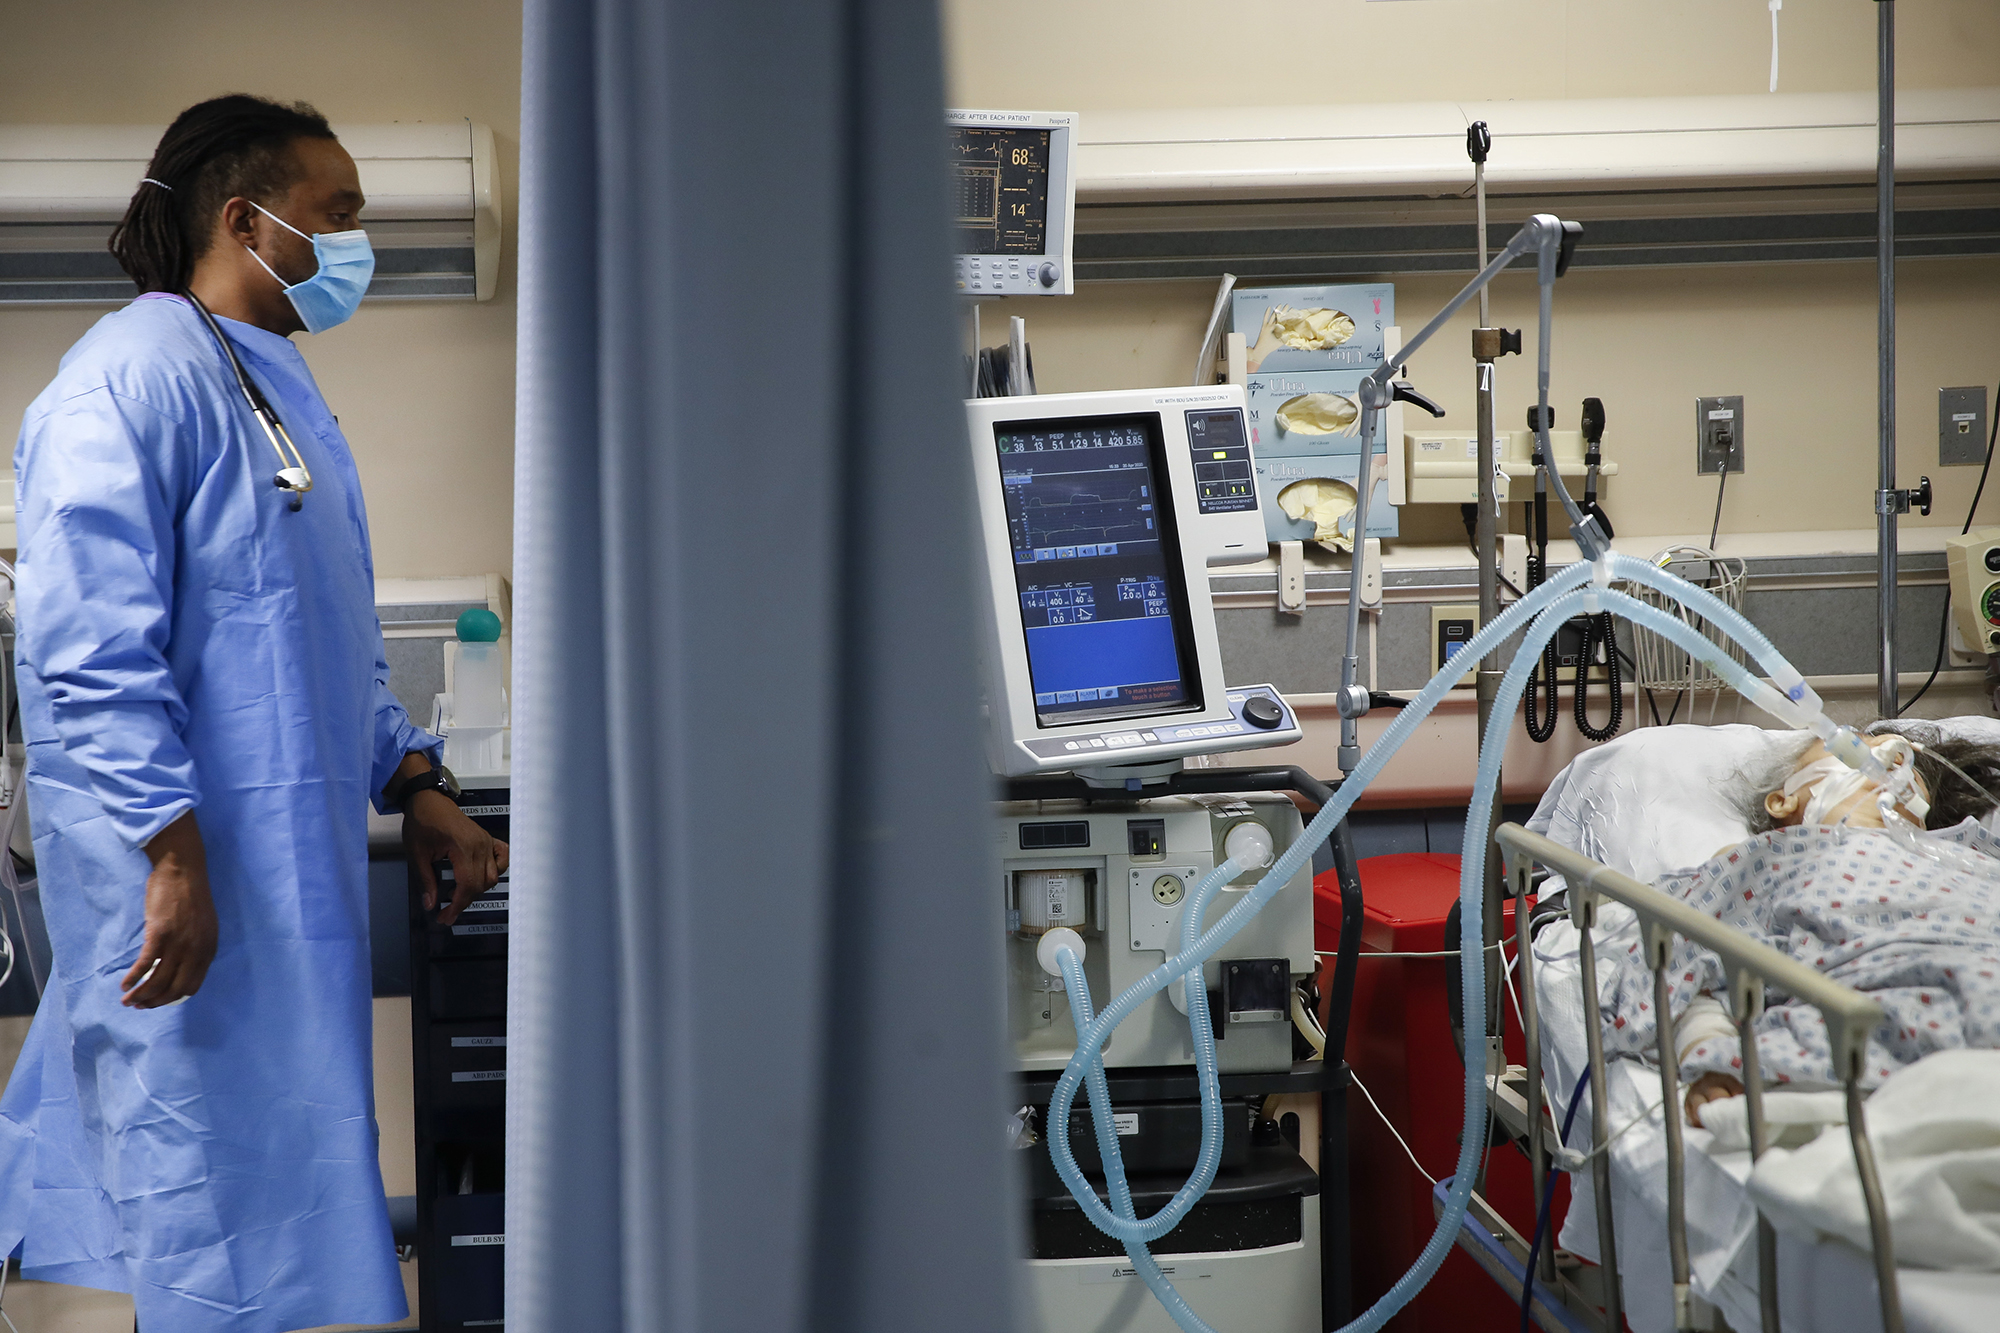 A nurse looks over at a COVID-19 patient who is attached to a ventilator